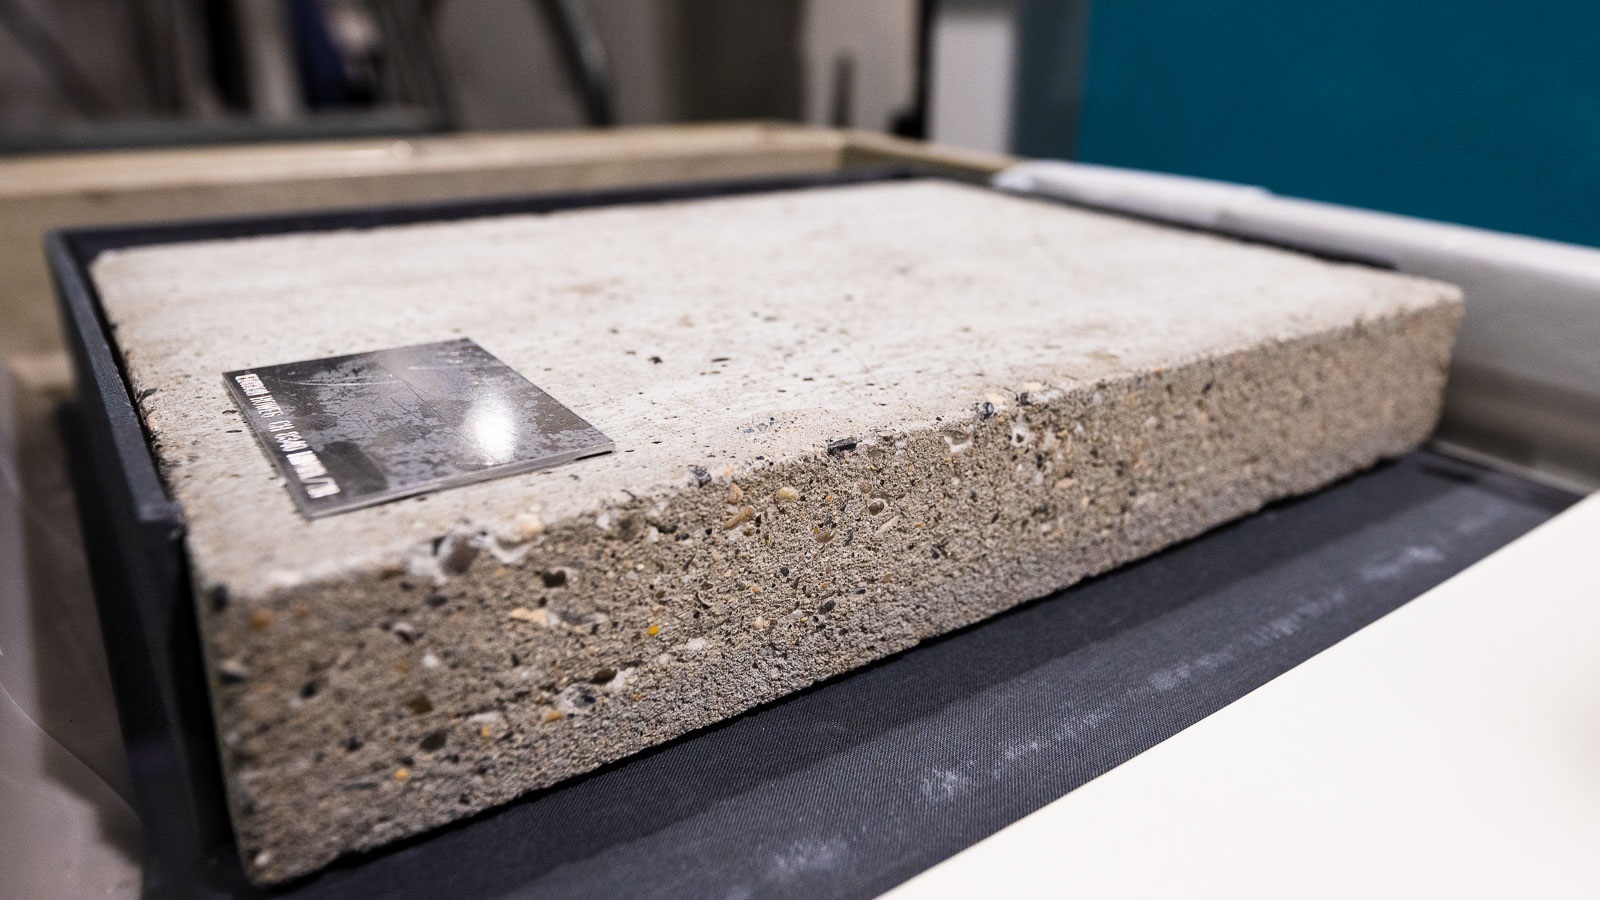 The University of Chicago owns Concrete Book #83. It’s roughly two inches thick and supposedly contains a copy of artist Wolf Vostell’s book on concrete as an artistic medium.